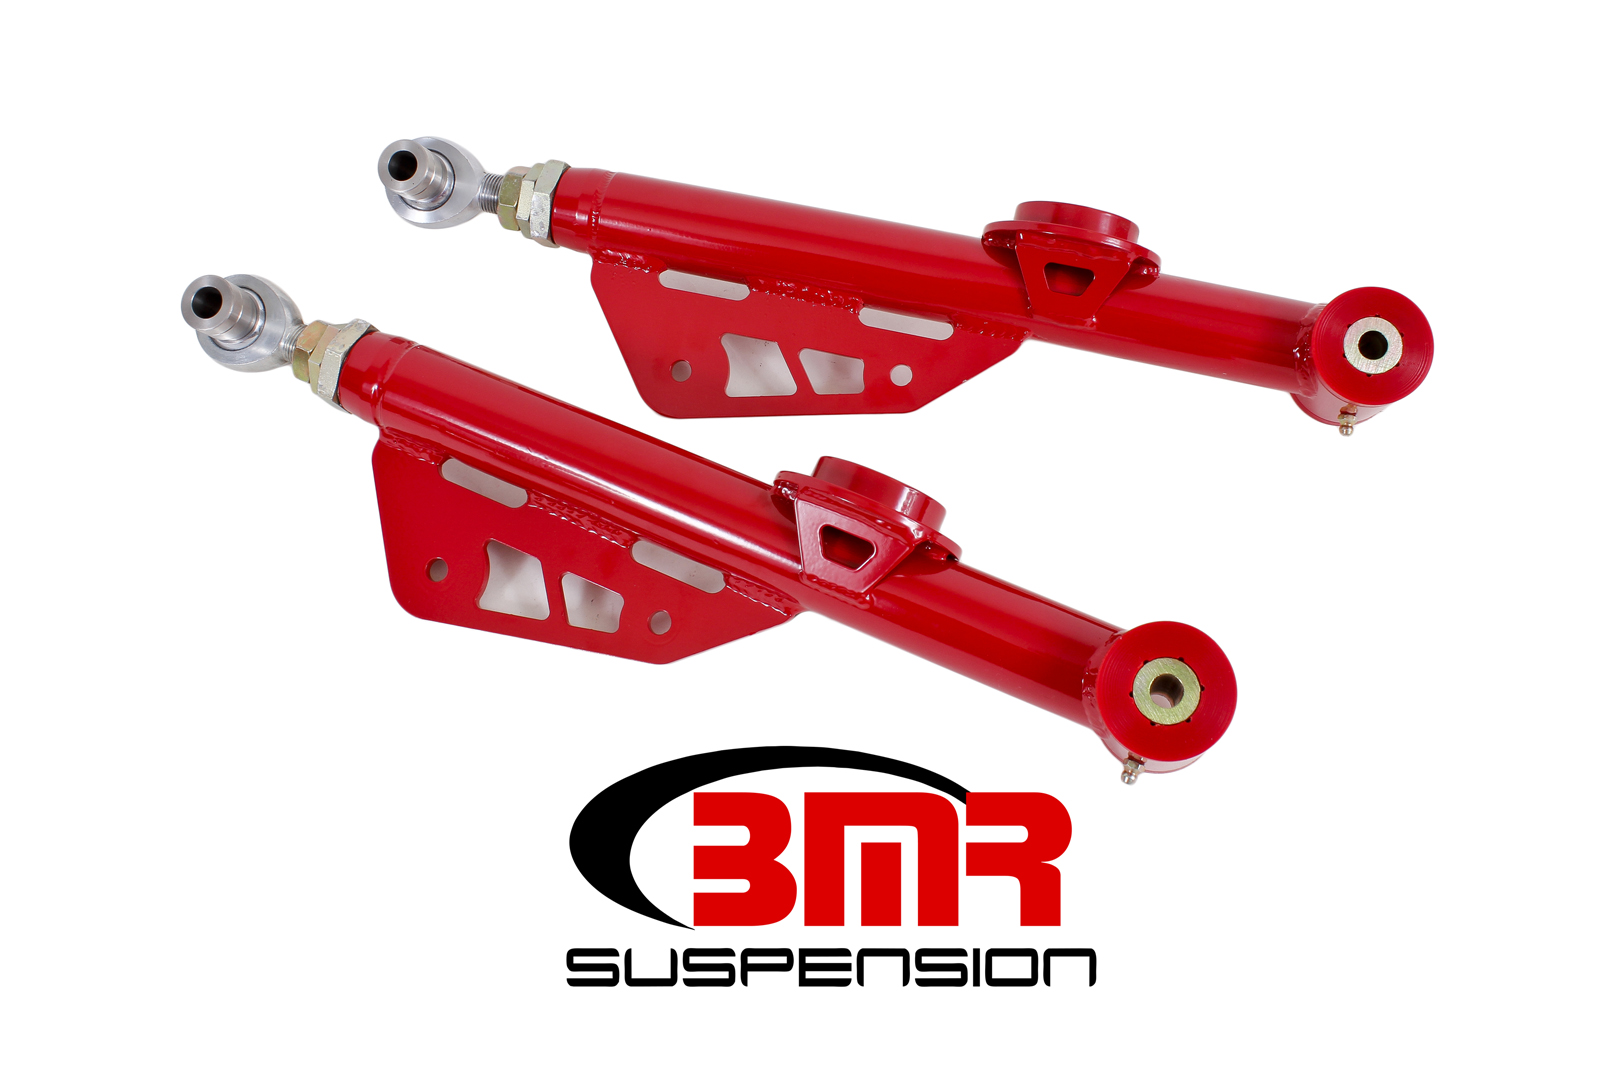 Lower Control Arms, DOM, On-car Adj, Poly/rod End, Fits all New Edge Mustangs (1999-2004), BMR Suspension - TCA055R